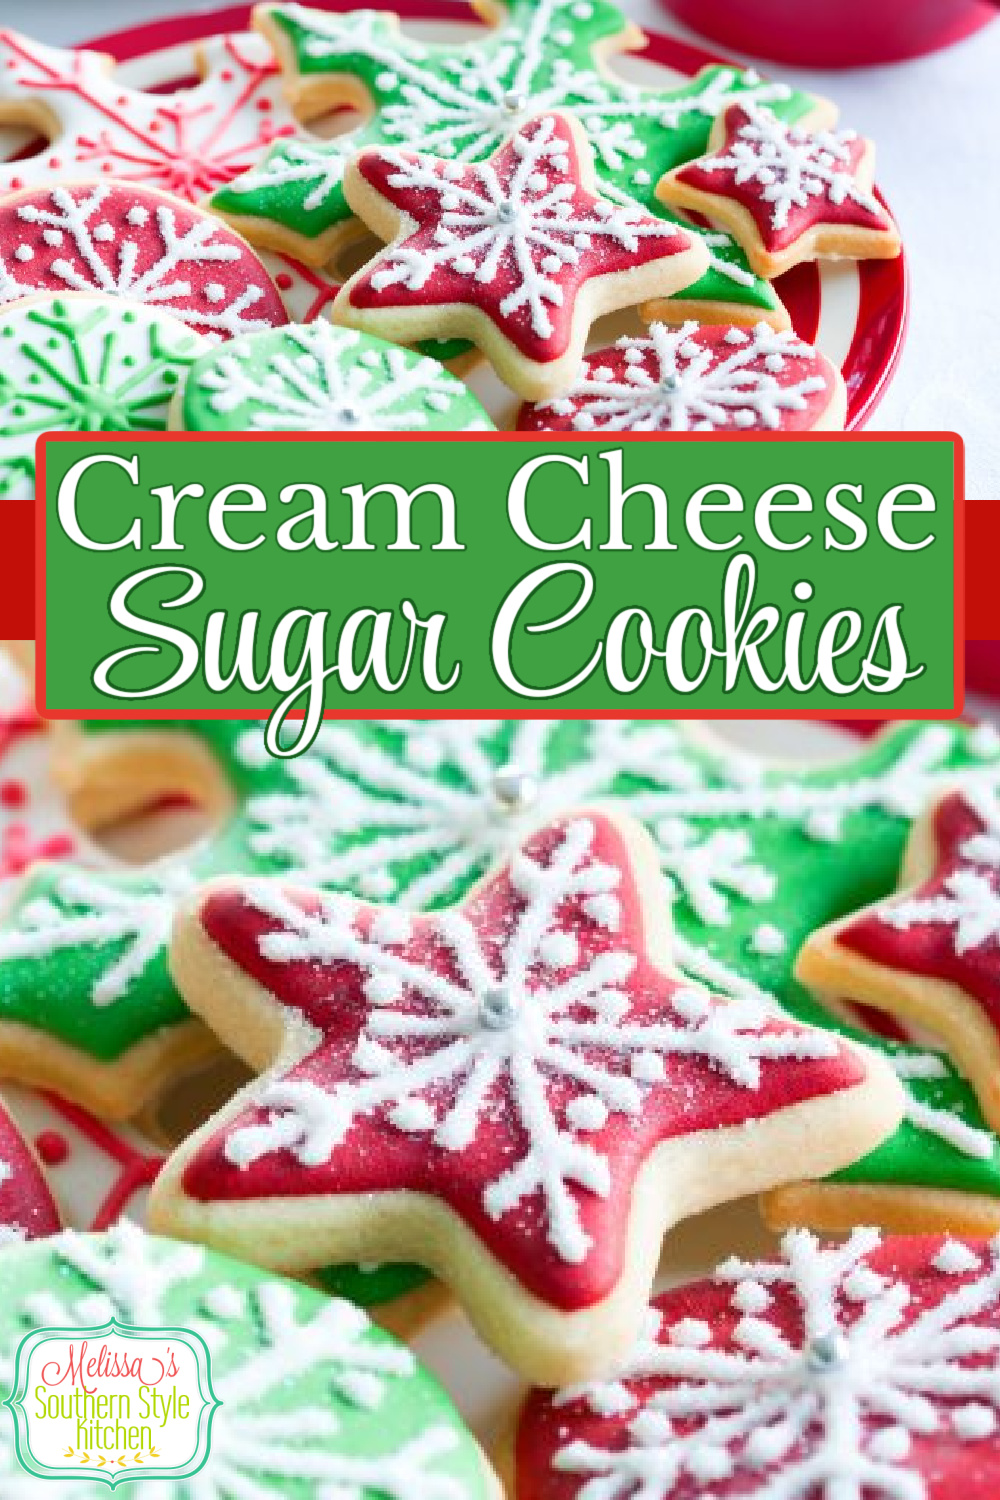 Add these Cutout Cream Cheese Sugar Cookies to your holiday baking plans #christmascookies #sugarcookies #bestsugarcookies #creamcheesecookies #cookierecipes #holidayrecipes #holidaybaking #creamcheesecookies #holidays #cookieswap #desserts #dessertfoodrecipes #southernrecipes #southernfood #melissassouthernstylekitchen via @melissasssk